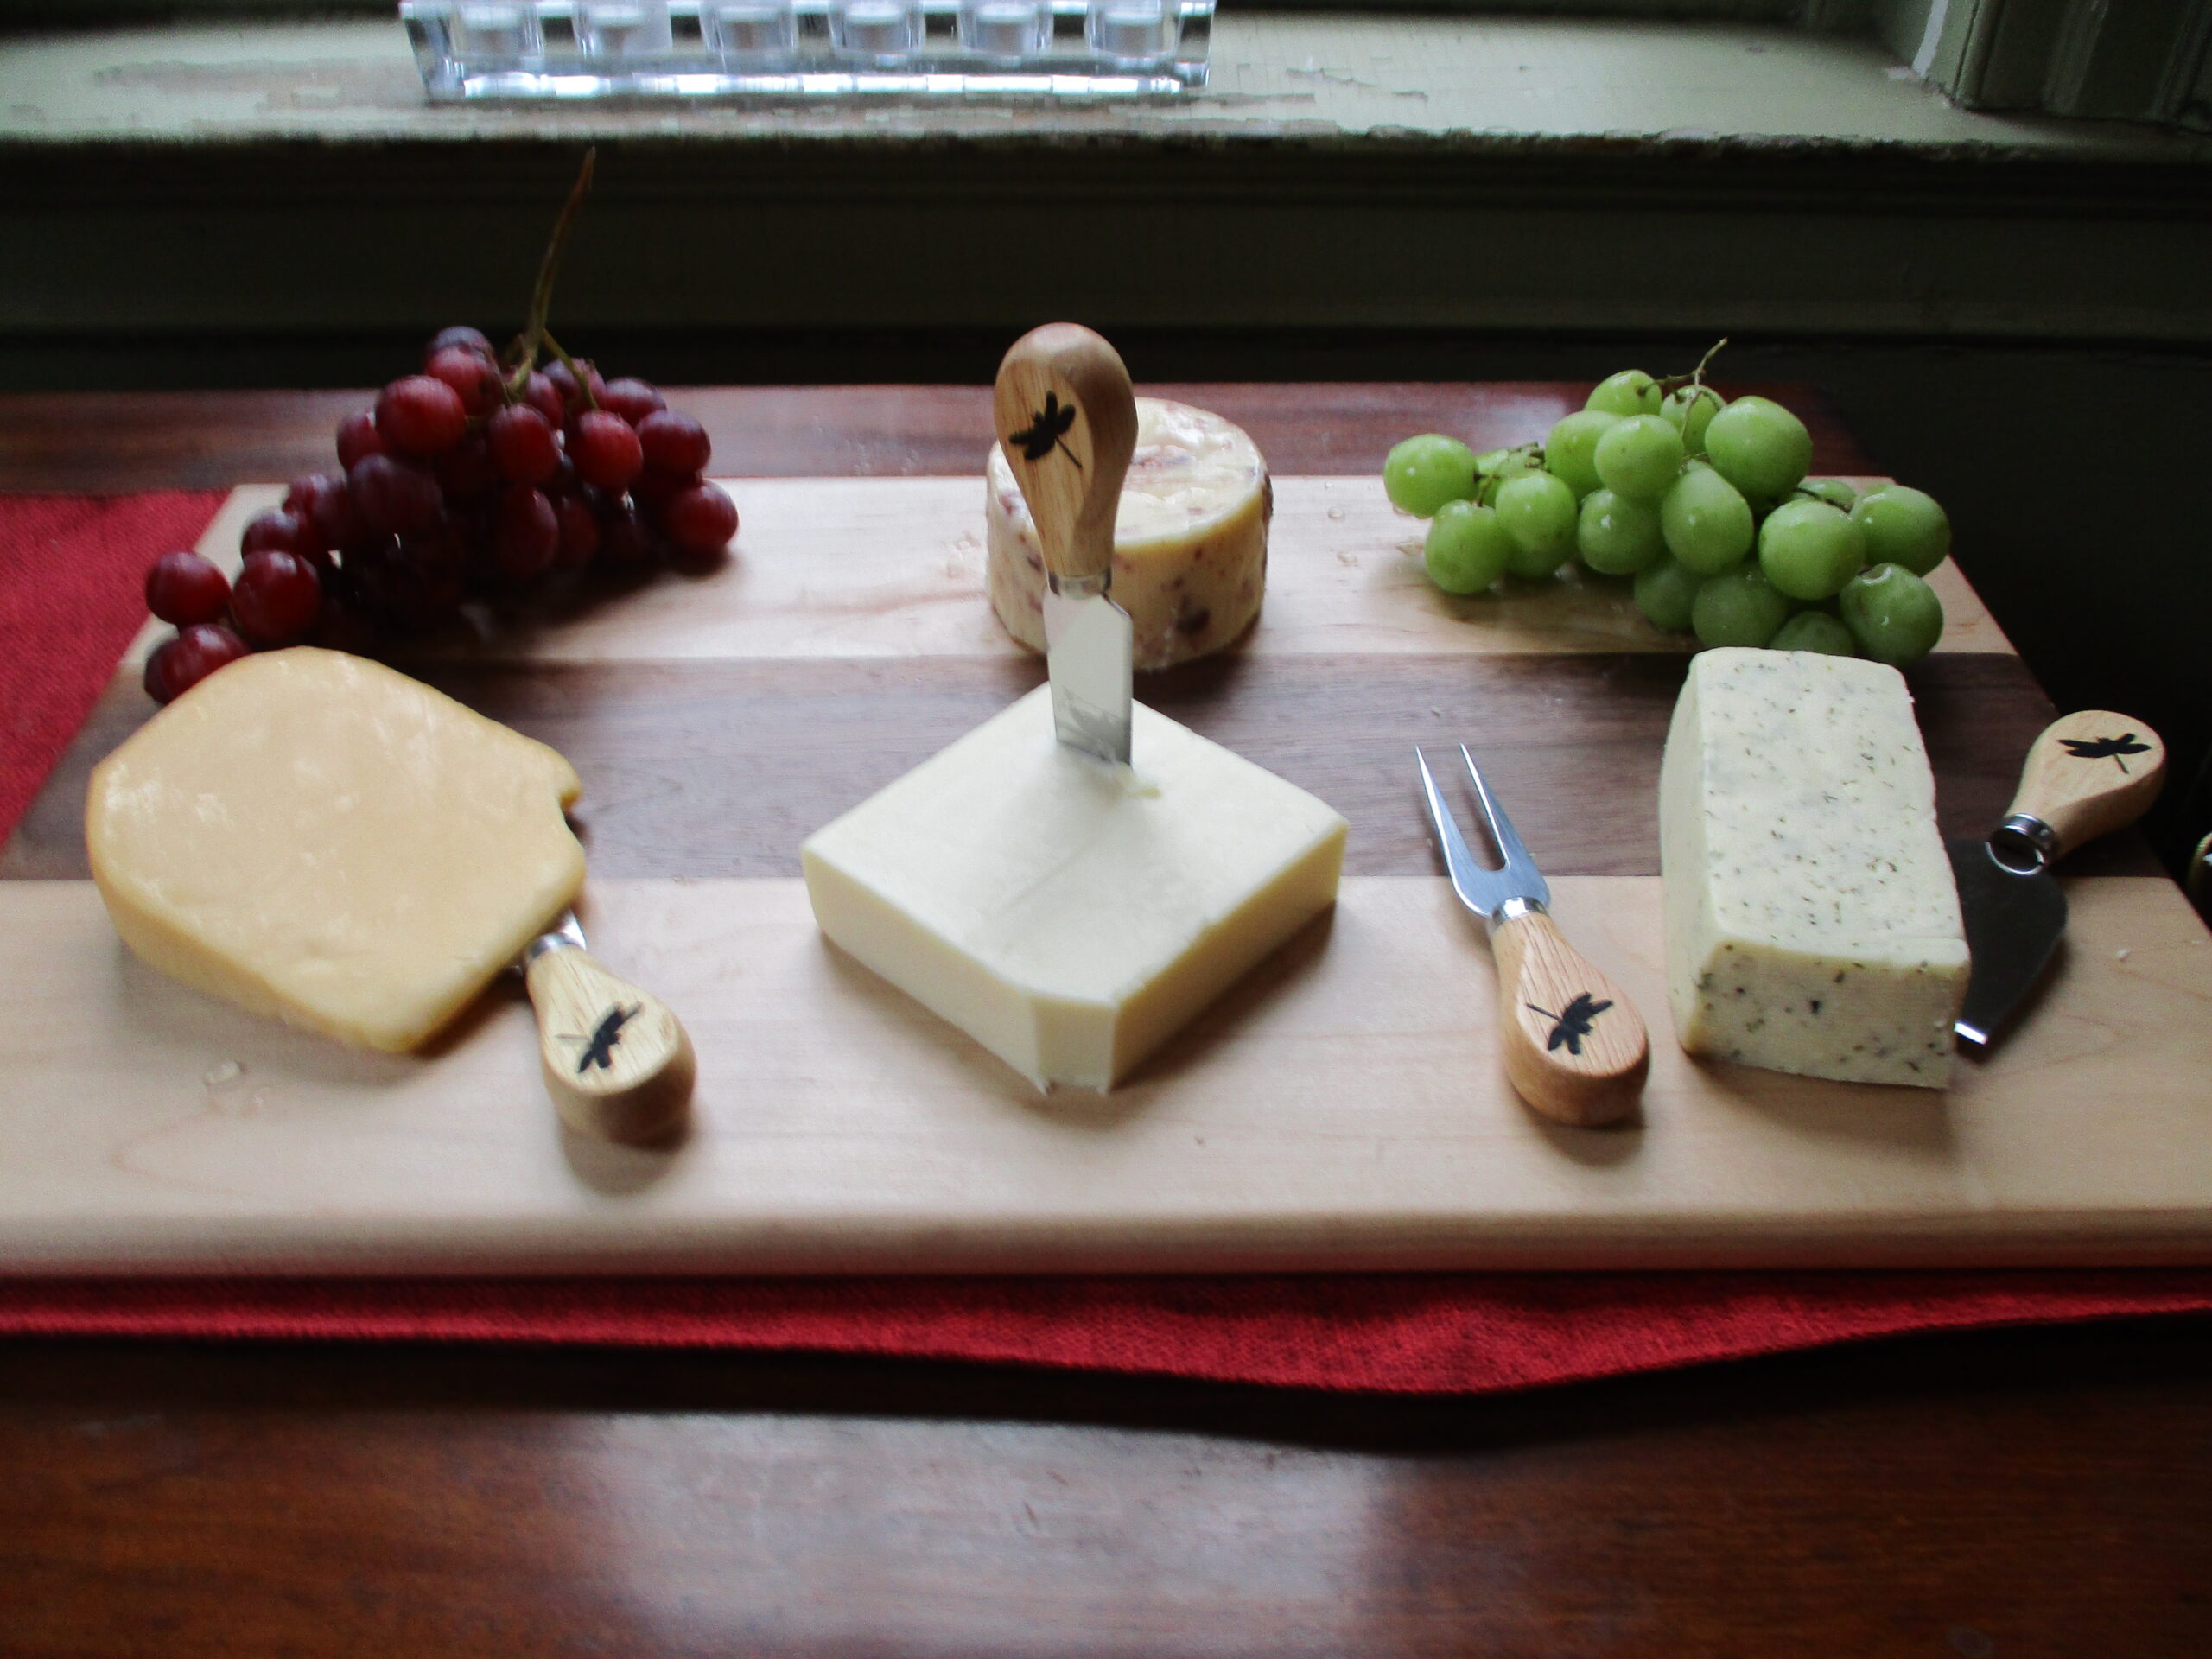 Custom Maple and Walnut cutting board/charcuterie board as a housewarming gift pictured with fruit and cheese.